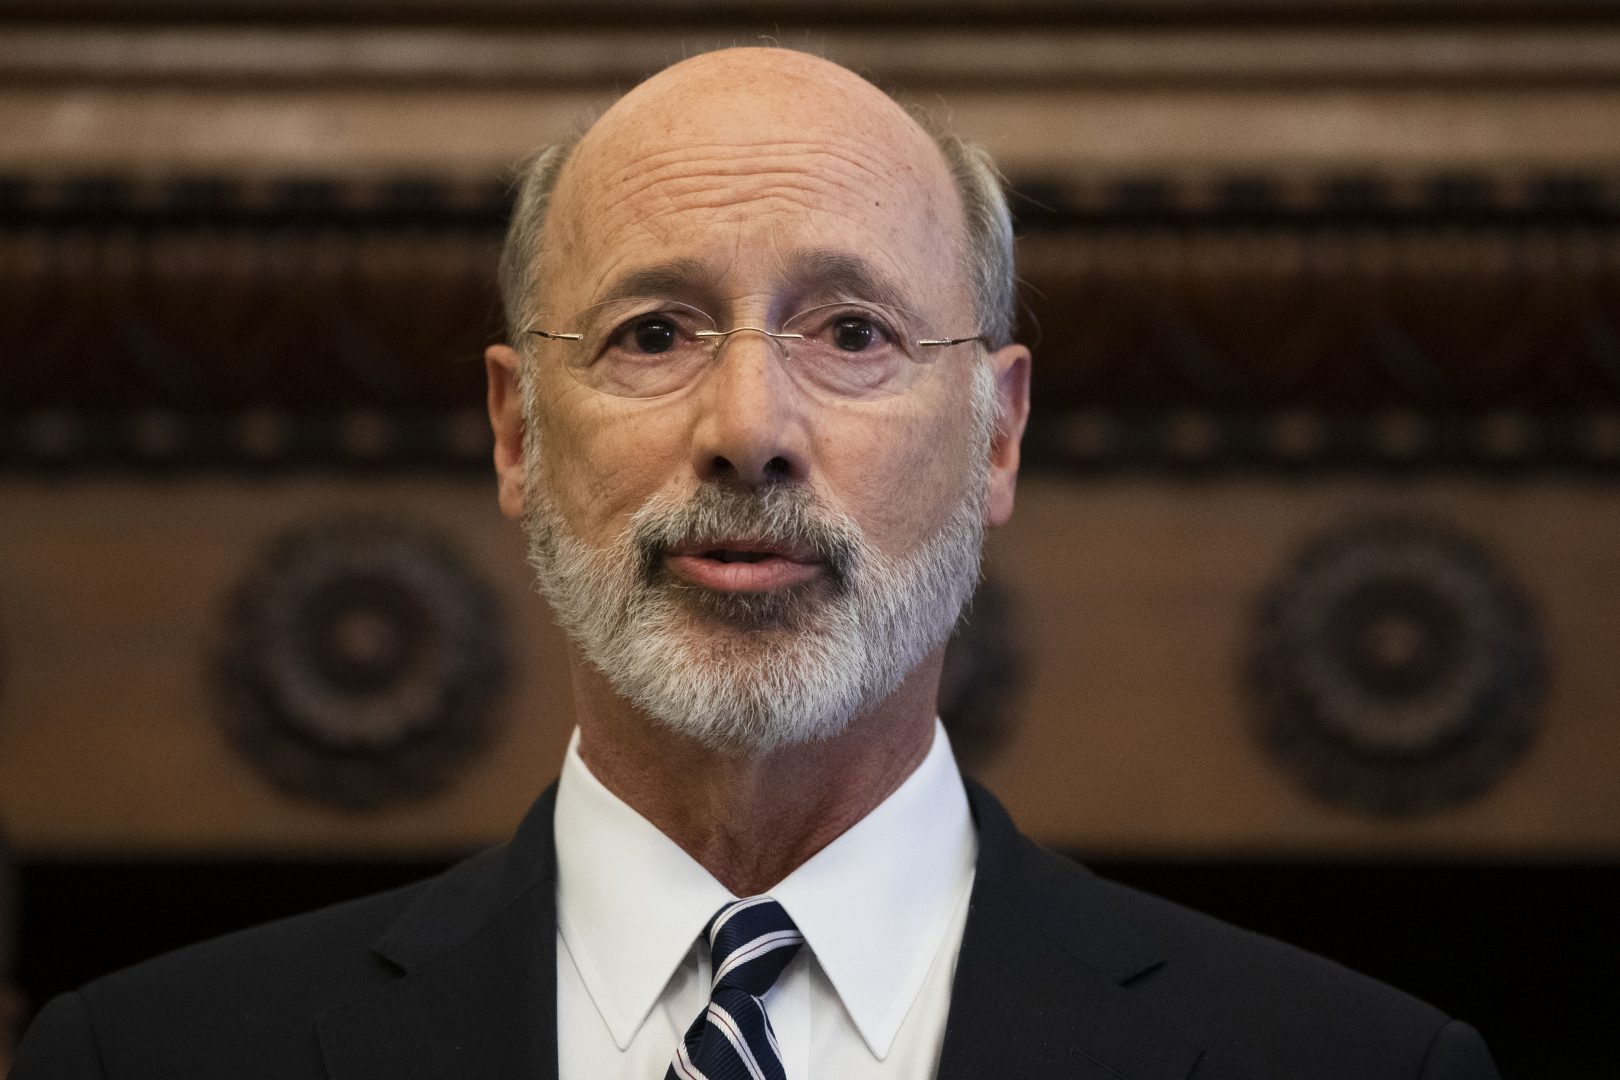 Gov. Tom Wolf speaks during a news conference at City Hall in Philadelphia, Thursday, Aug. 15, 2019. A gunman, identified as Maurice Hill, wounded six police officers before surrendering early Thursday, after a 7 ½-hour standoff.